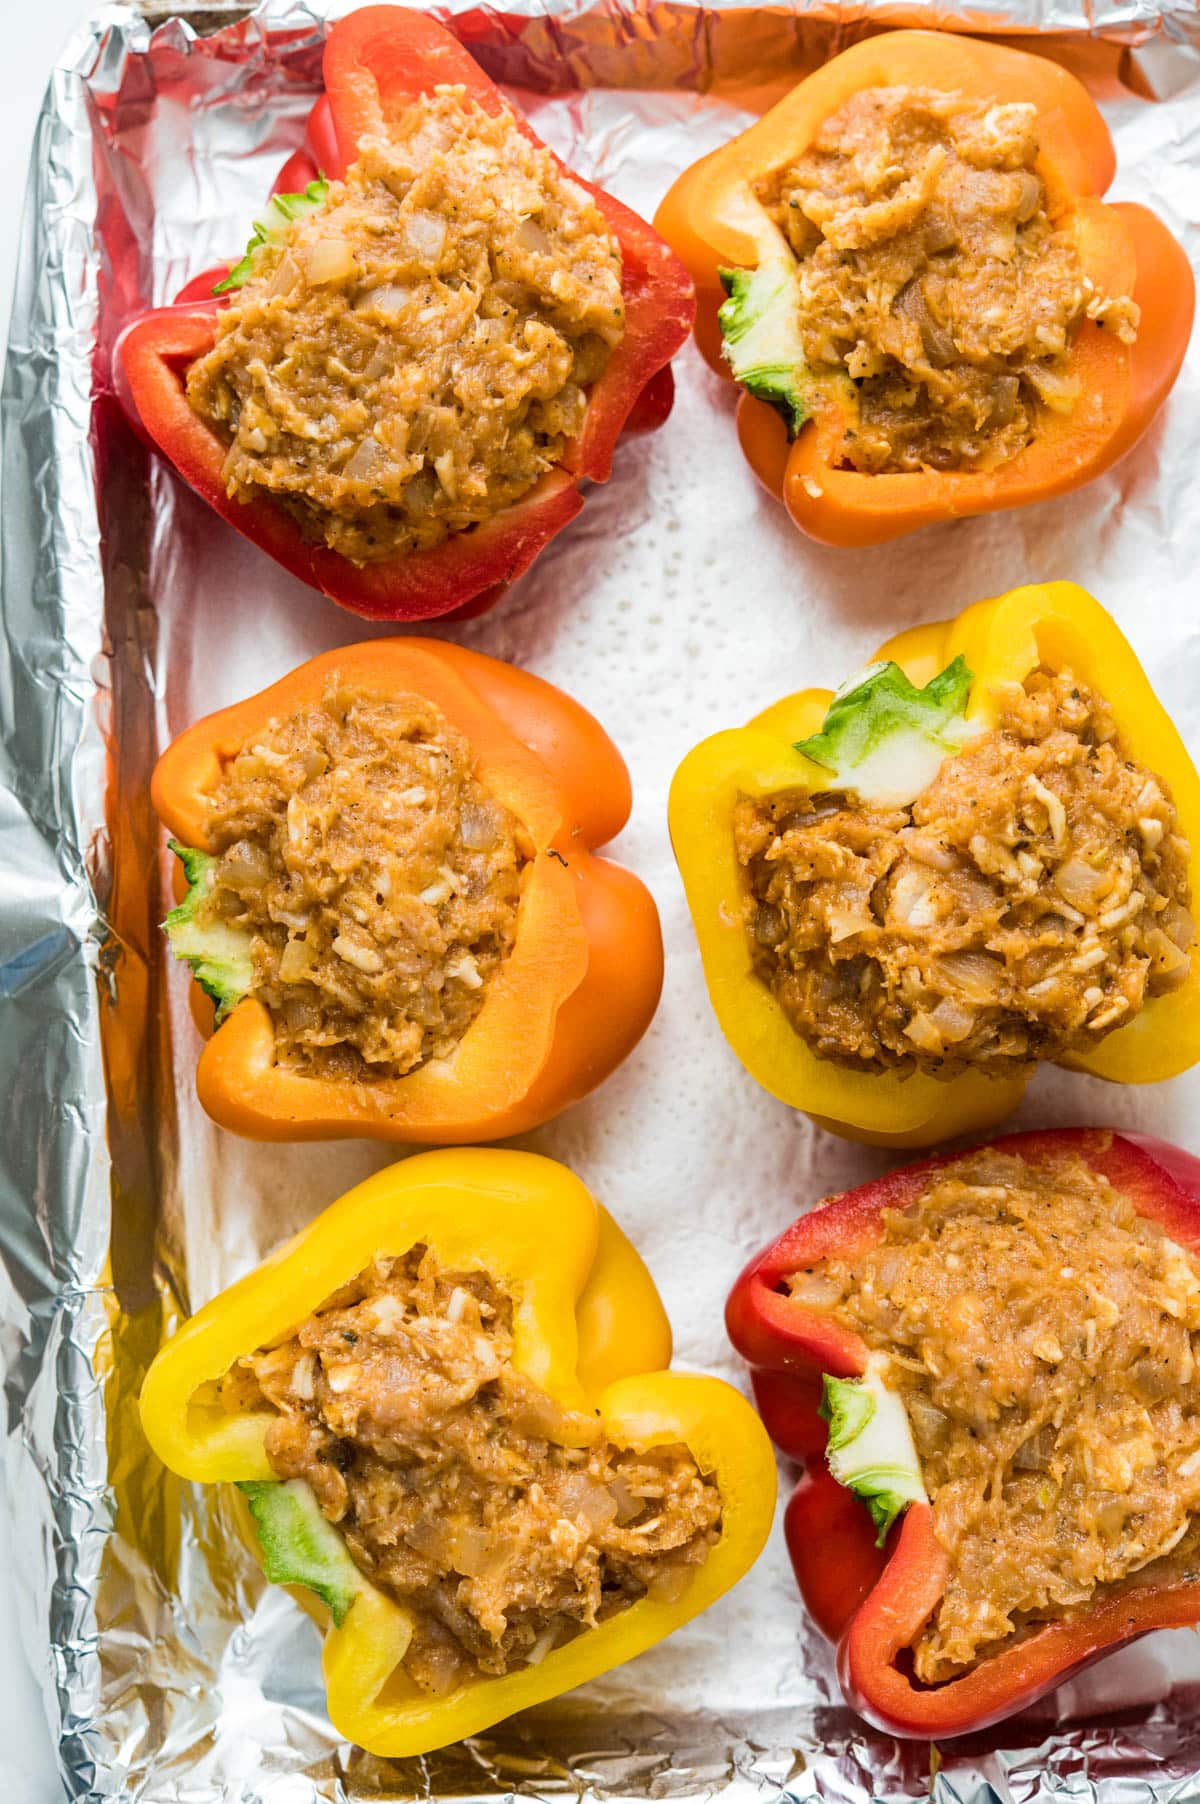 Stuffing the bell peppers with the turkey taco filling.